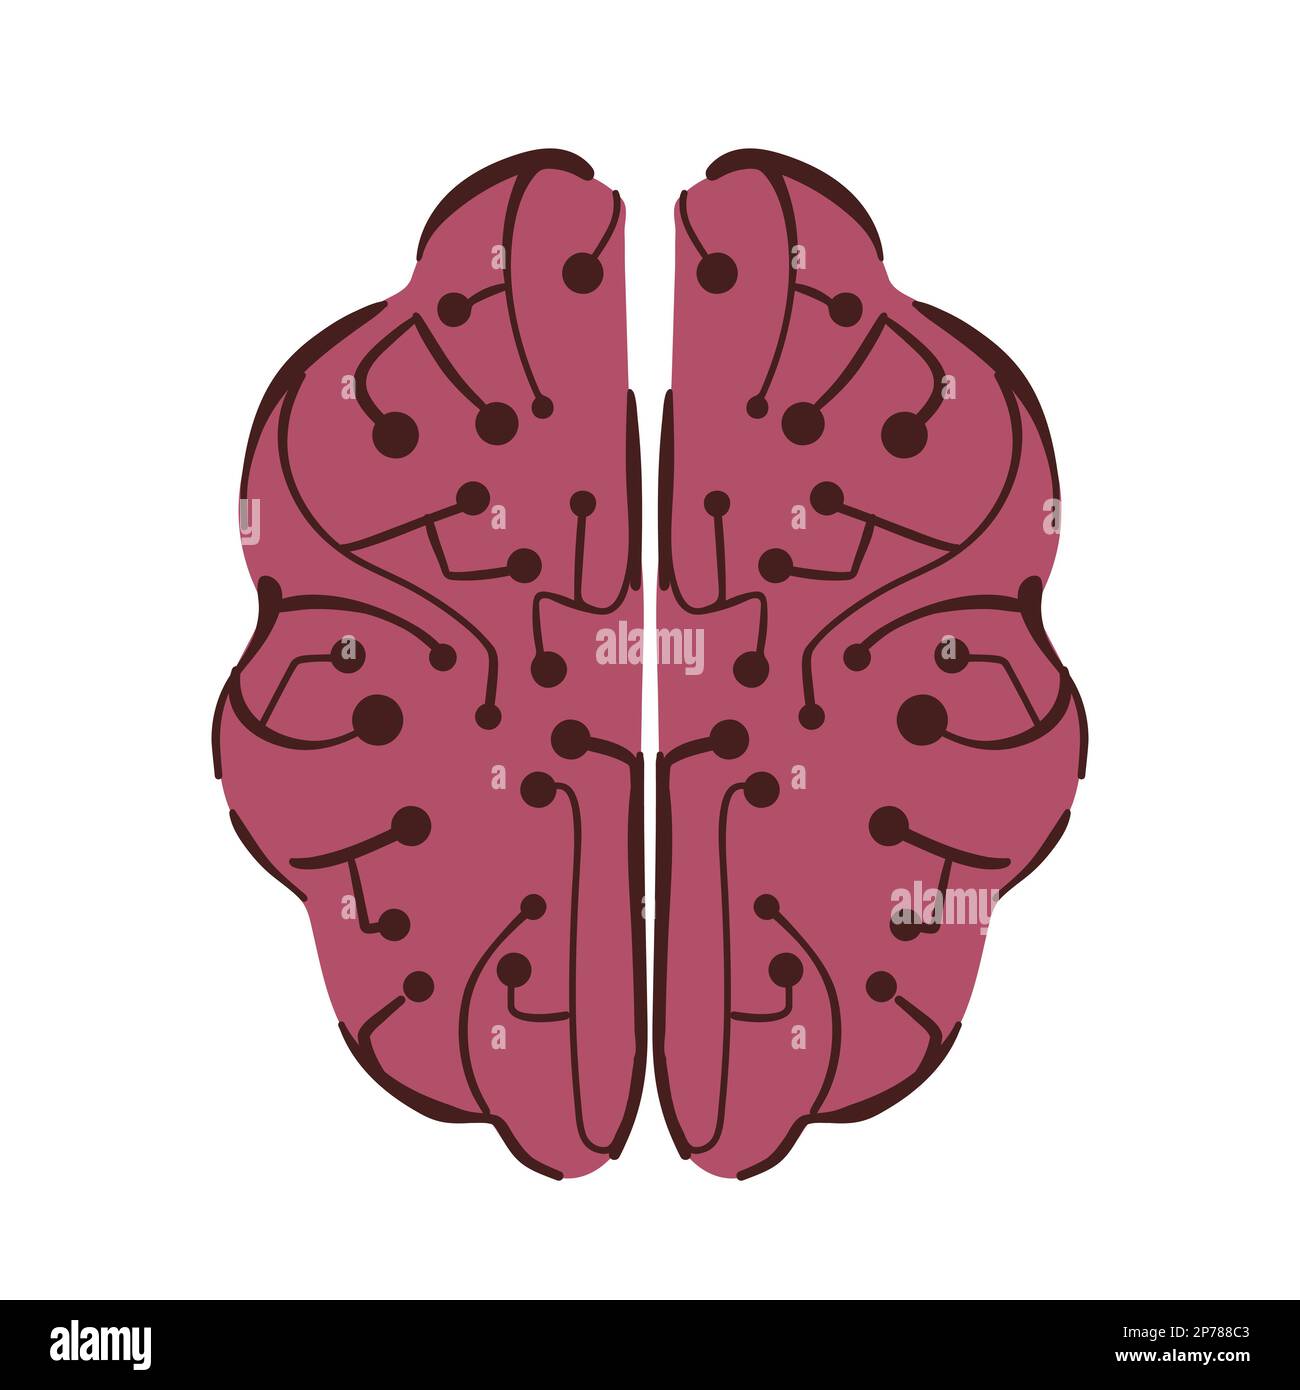 Brain made from digital isolated on white. Stock Vector